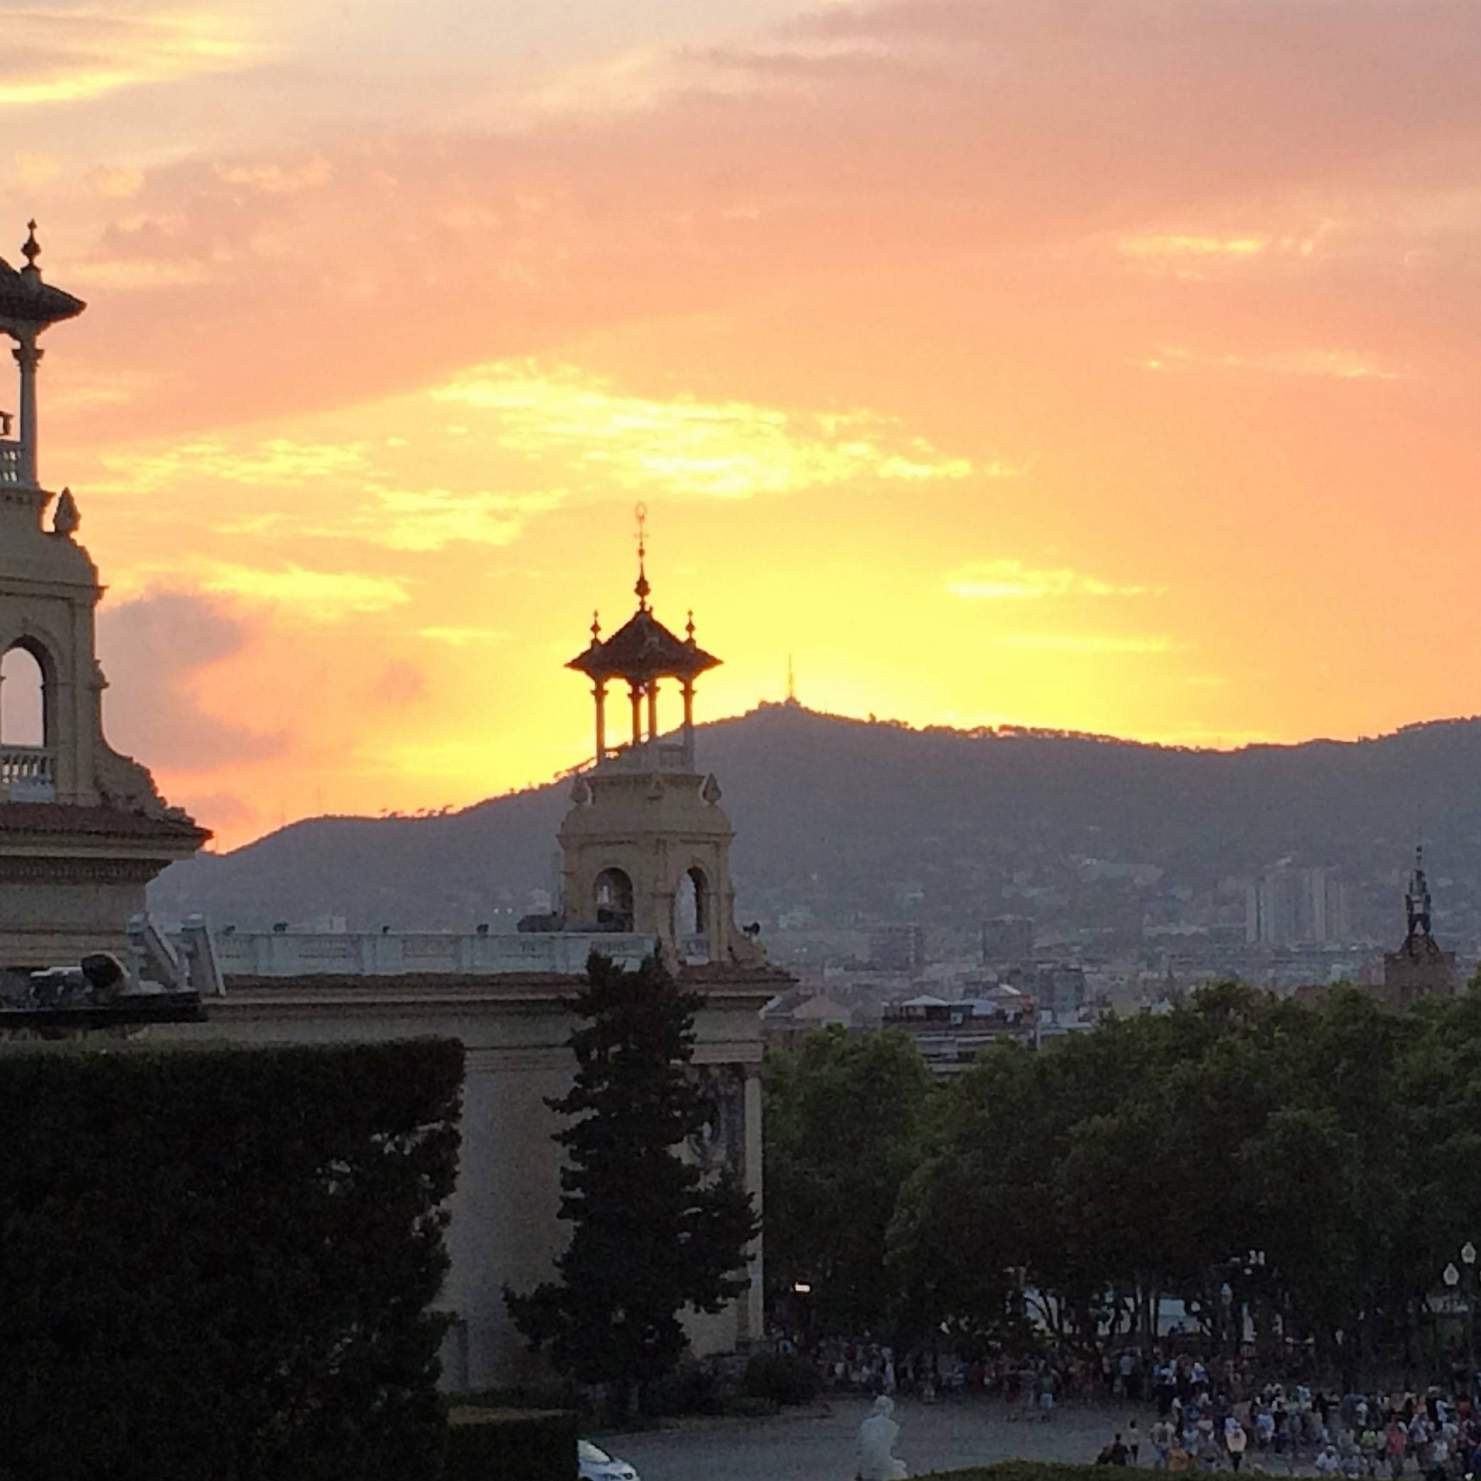 Sunset in Barcelona from Museum of Catalan Art